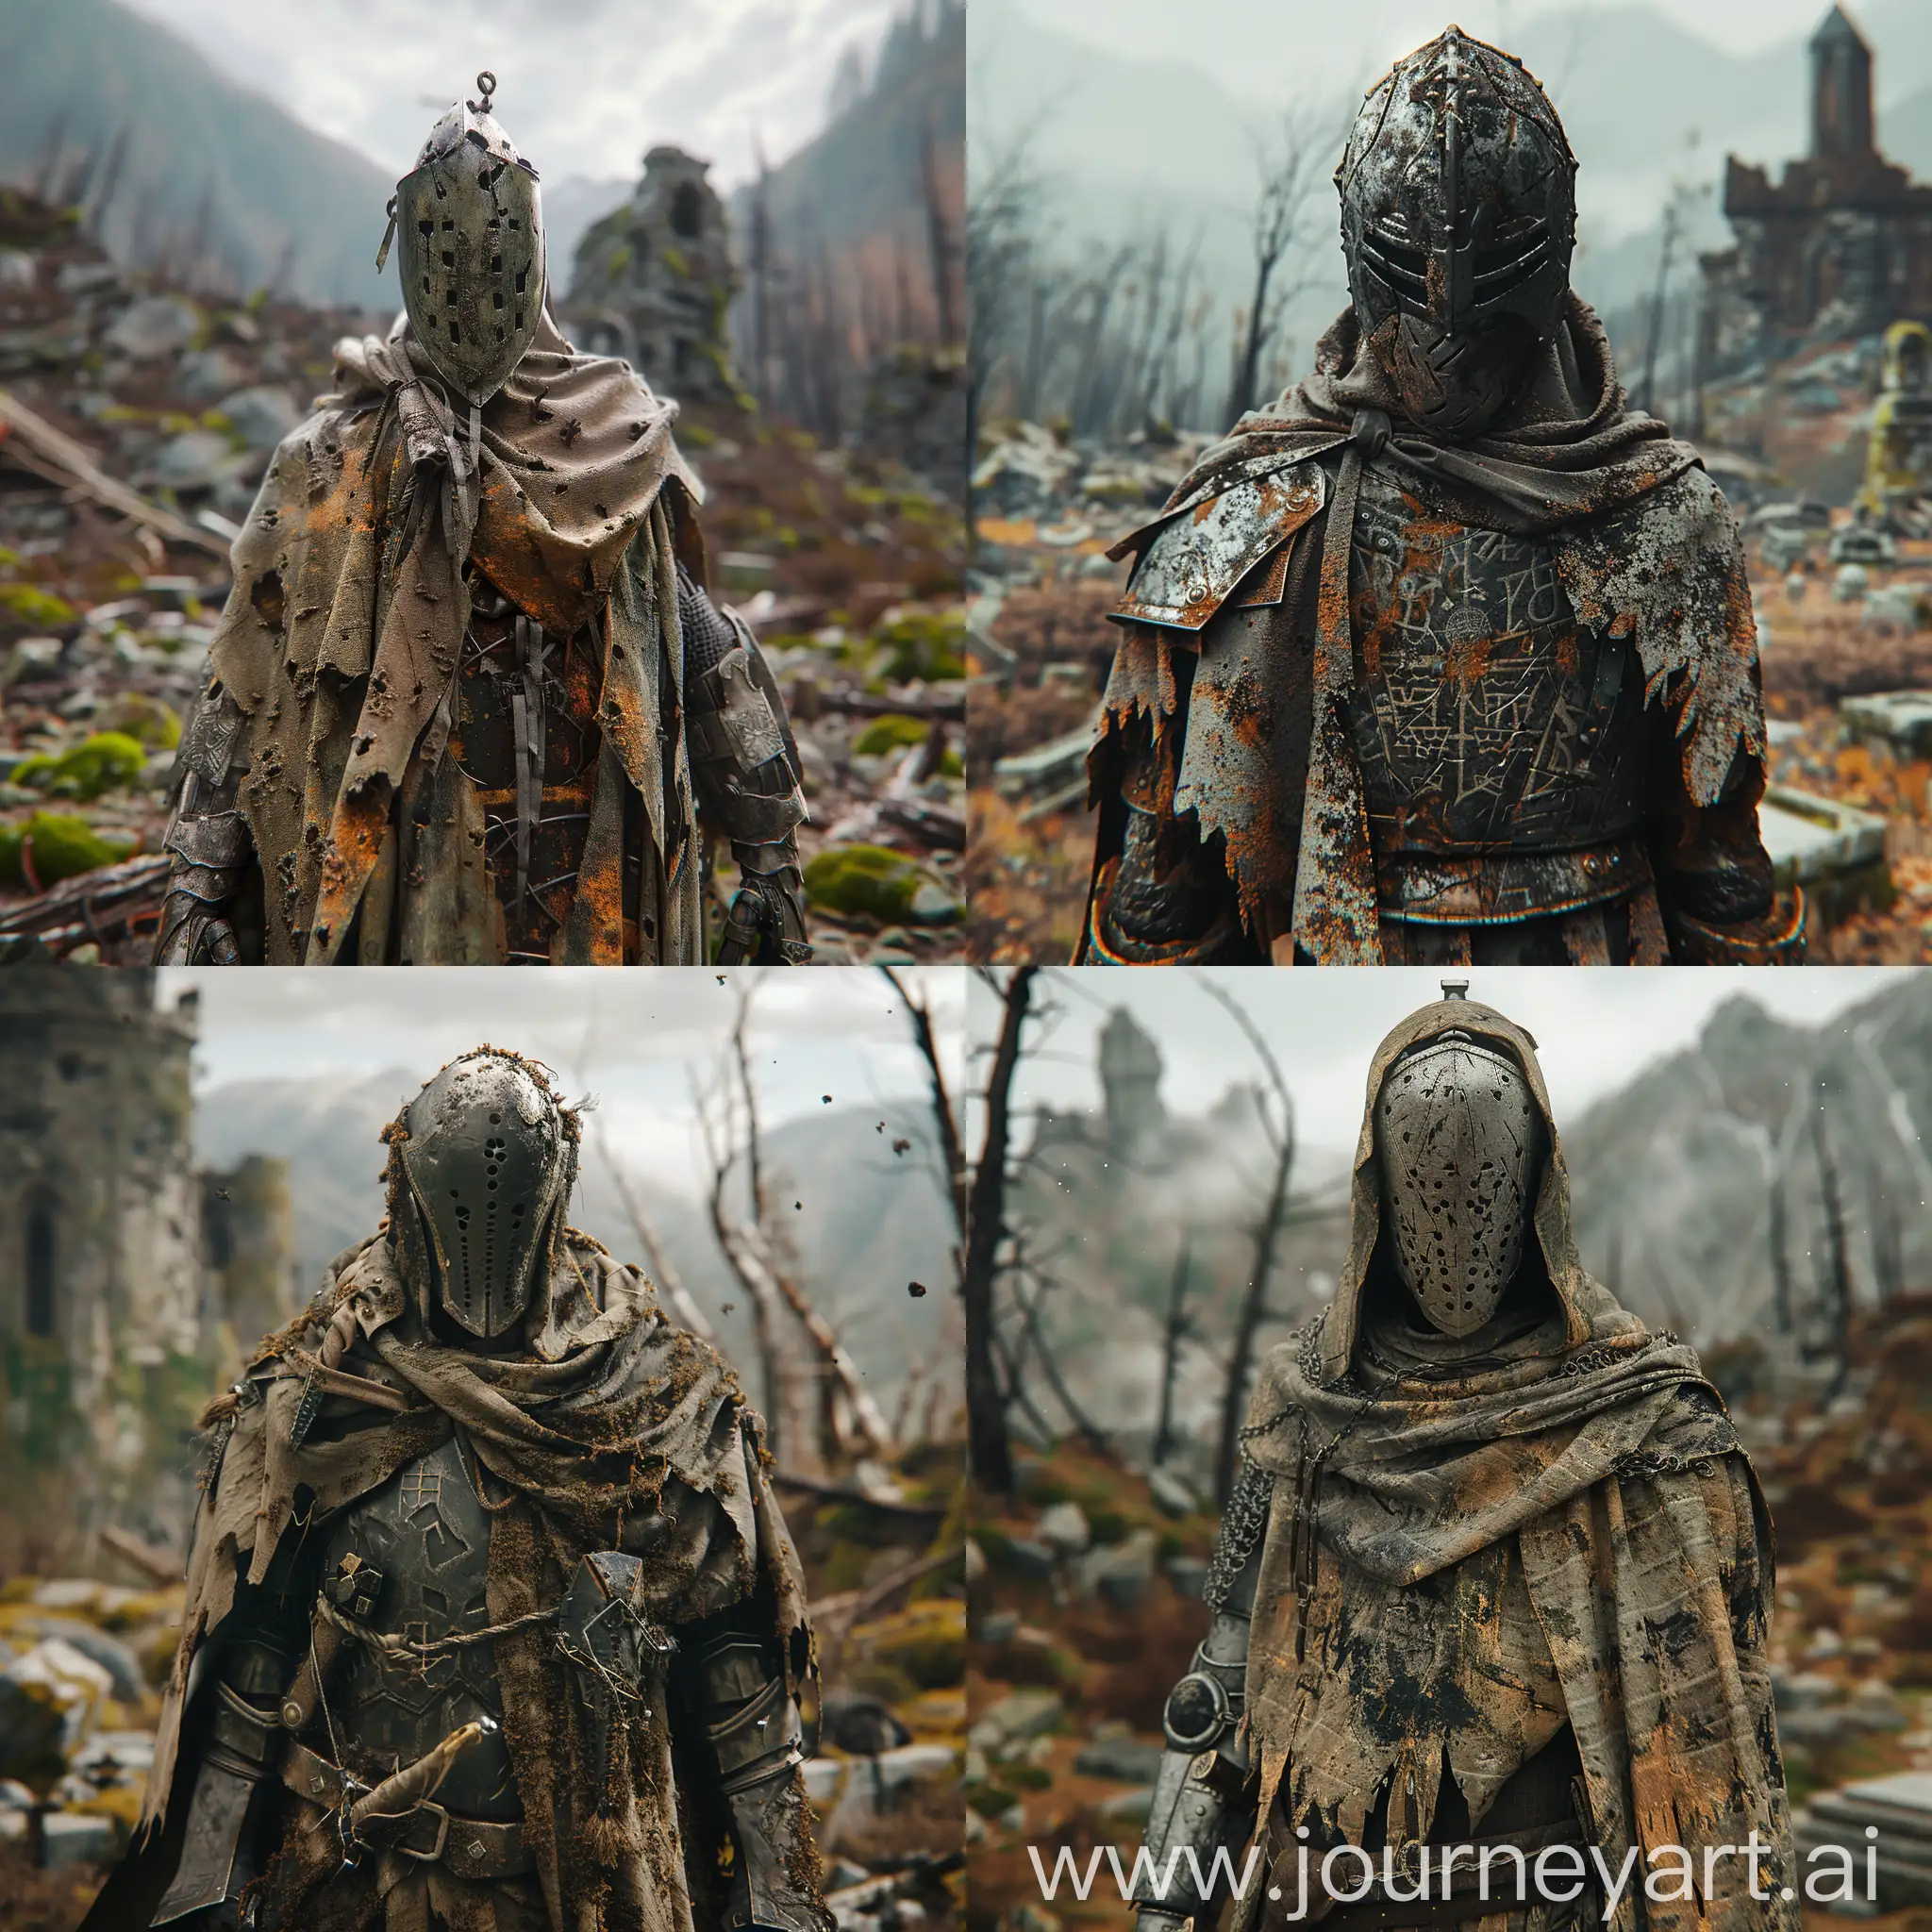 Masterpiece, 4k, unreal engine m5, volumetric lighting, dof, bokeh, hyper realism, adof, vignette, dust, moss, aged, old, scarred, burnt, runic, holy, magic, scorcerer, mechanized, light armour, dark fantasy, fantasy featureless helmet, highly detailed, tattered robes, burnt robes, destroyed land, castle ruins in background, burnt wood, unmarked tombs, mountainous background, dead forest